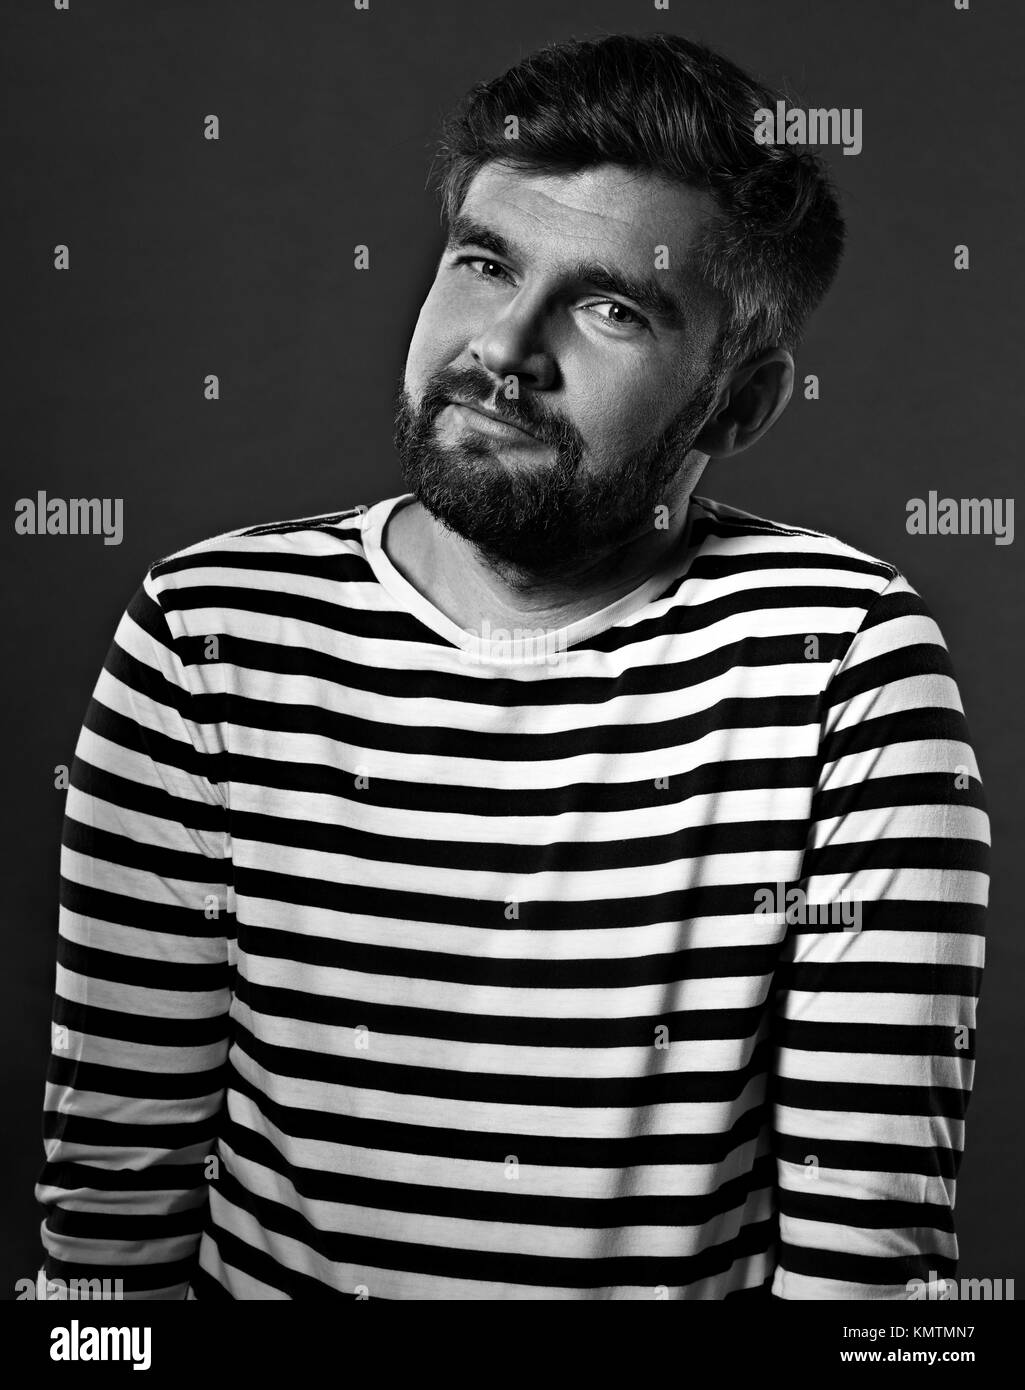 Bearded smiling emotional man in casual striped t-shirt on grey background. Closeup portrait. Black and white Stock Photo